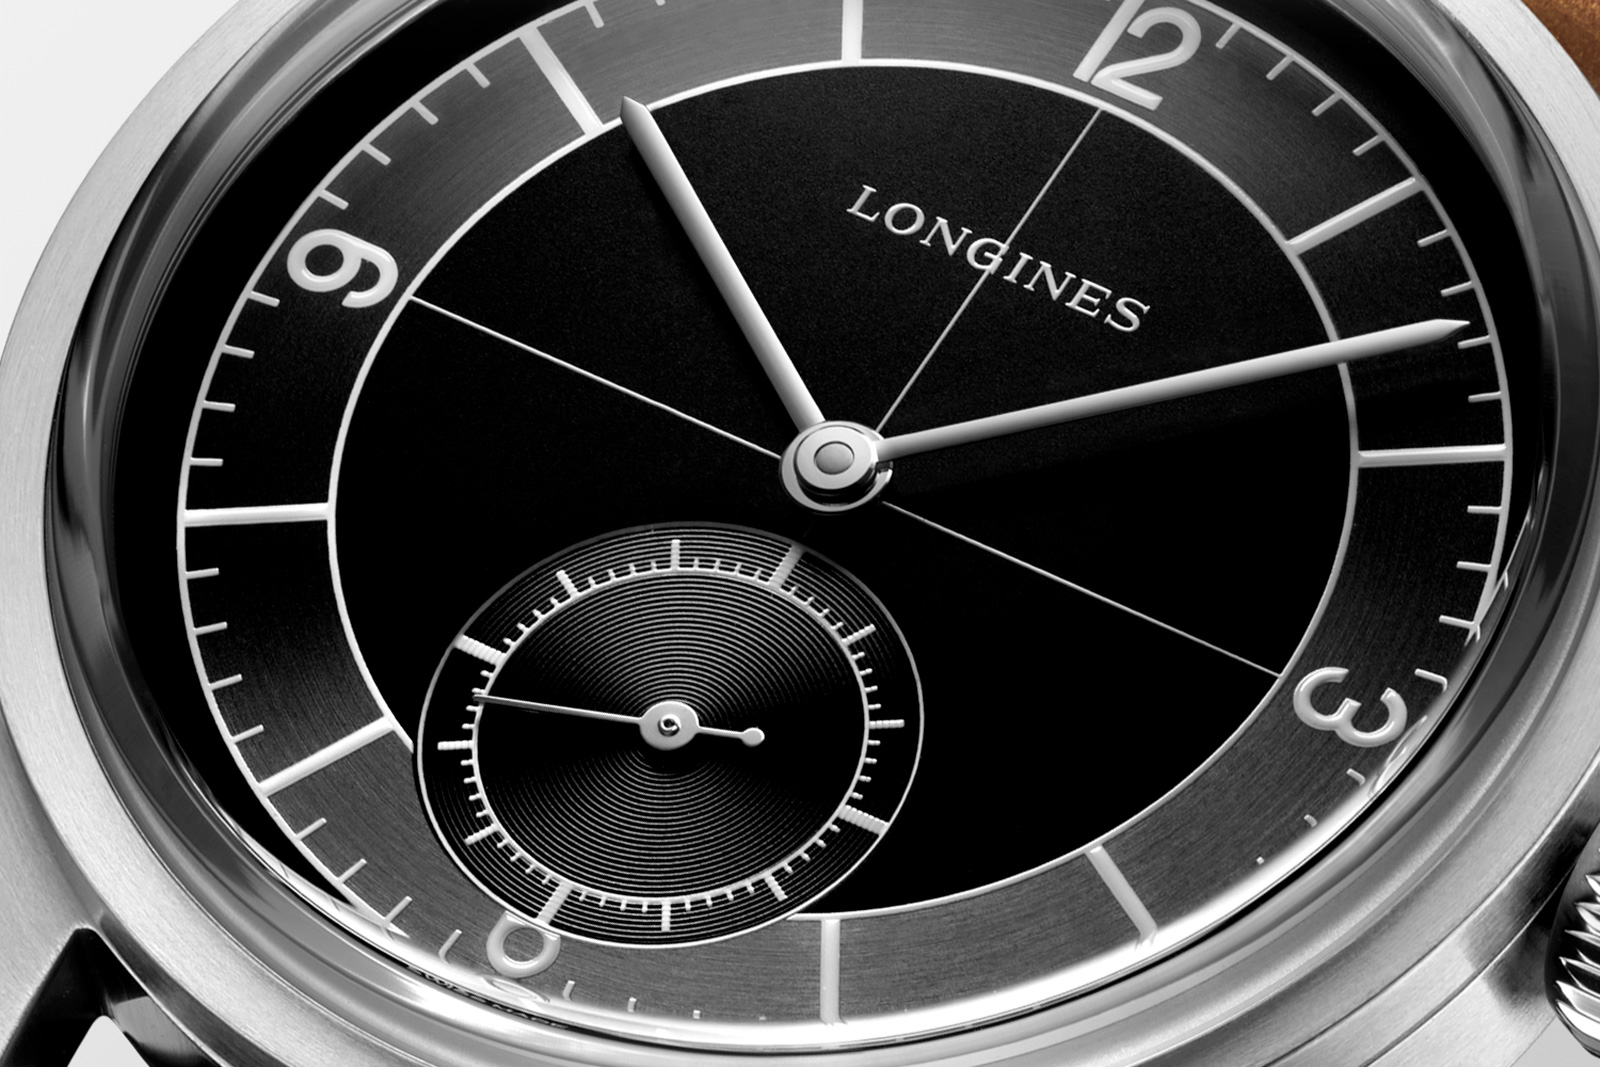 Longines Introduces the Heritage Classic “Sector” Dial in Black | SJX ...